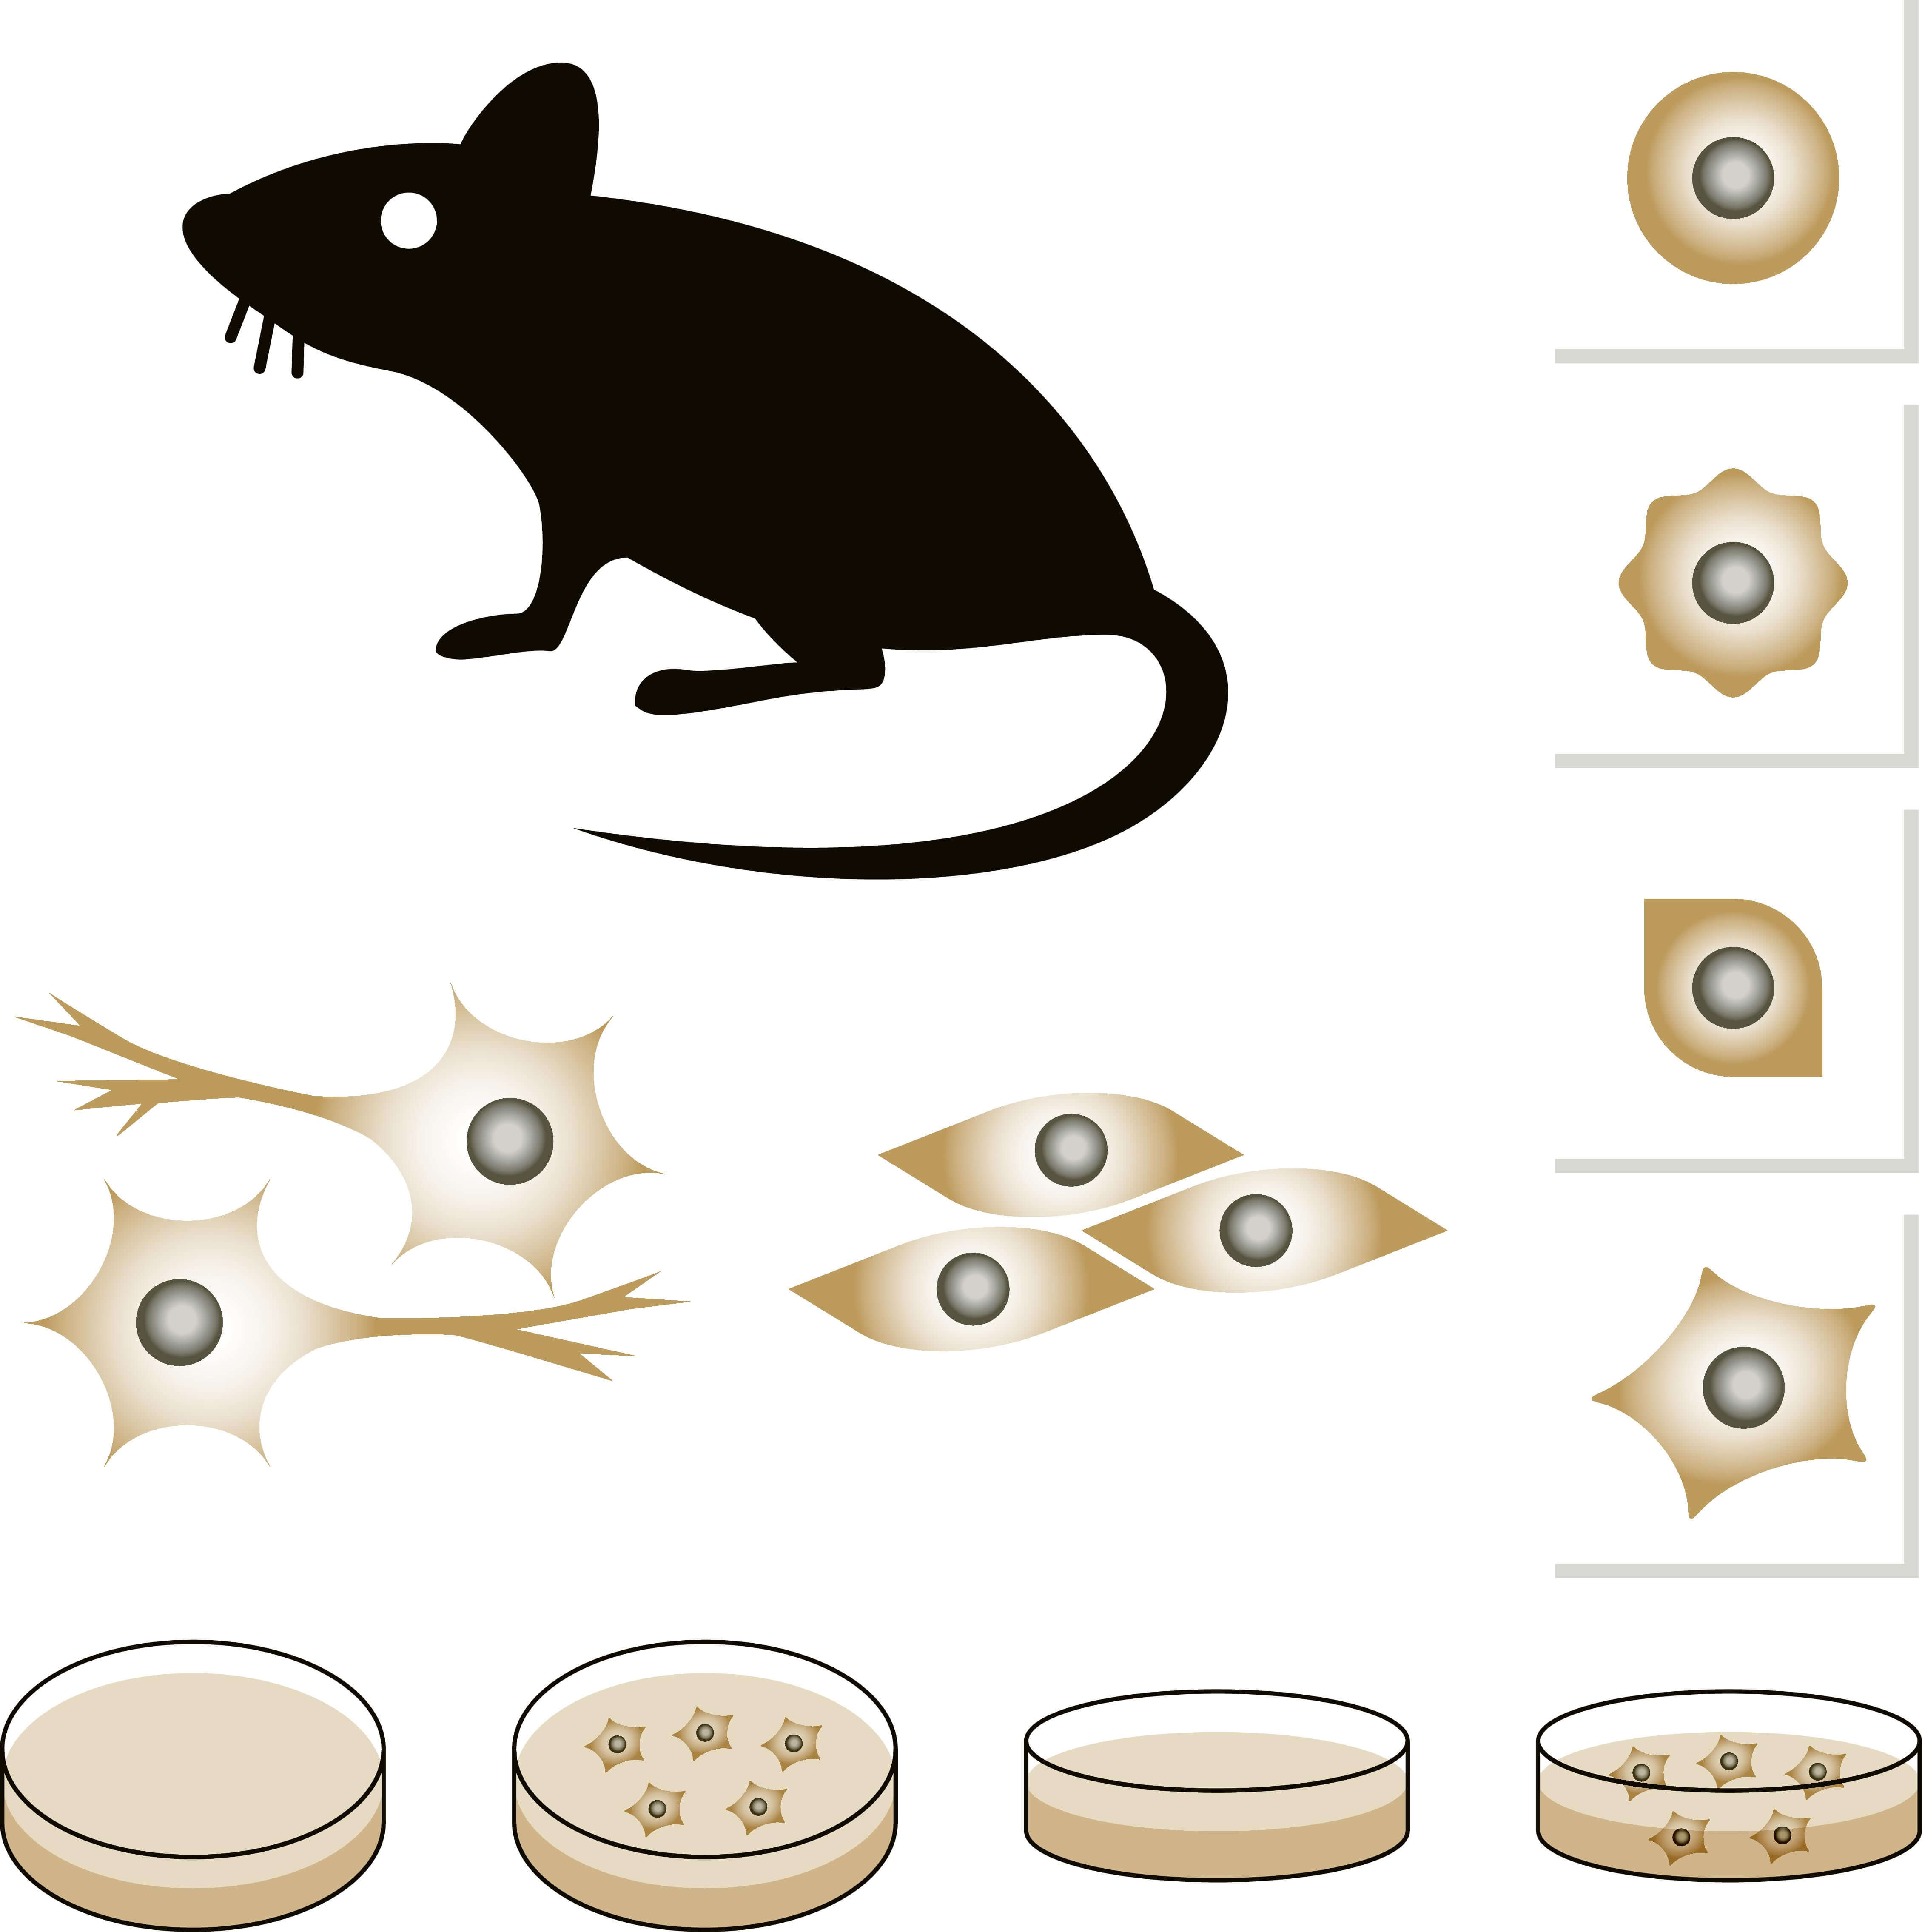 Mice as a model for the study of gas cells. Illustration: shutterstock